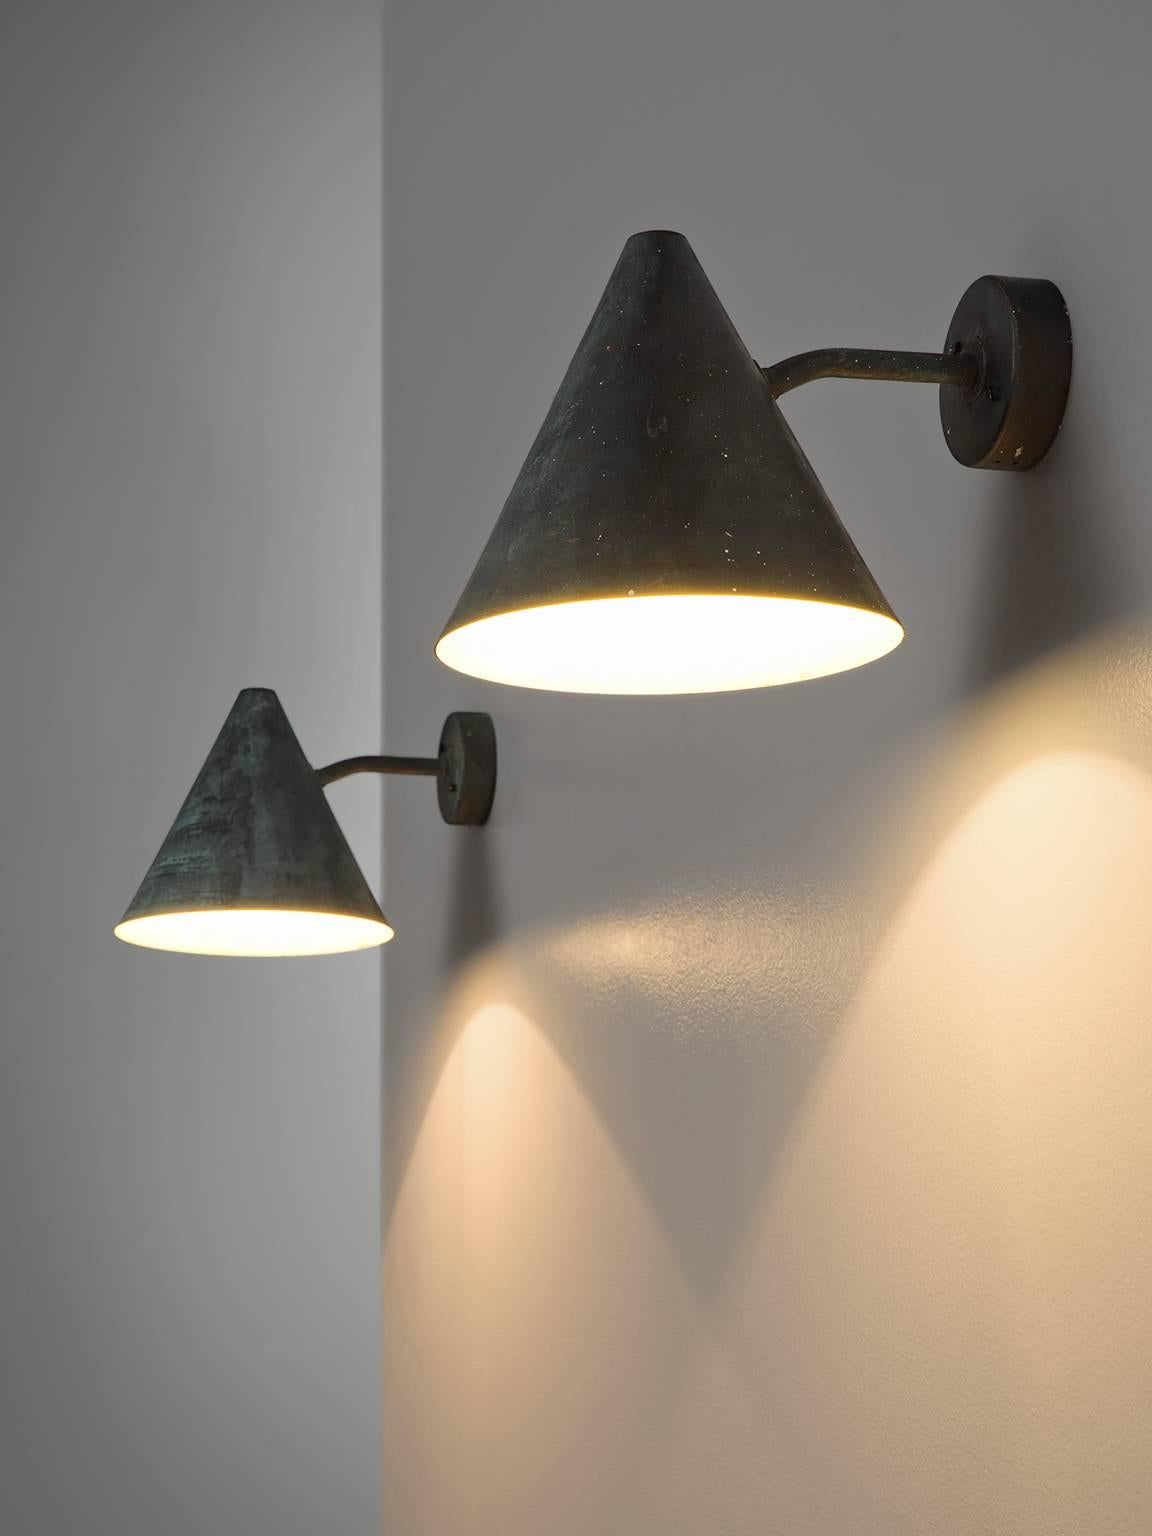 Hans-Agne Jakobsson for AB Markaryd, pair of wall lights, copper, Sweden, 1950s. 

Pair of cone-shaped wall lights designed by Hans-Agne Jakobsson for AB Markaryd, in beautifully patinated copper with an off white interior. The light this model